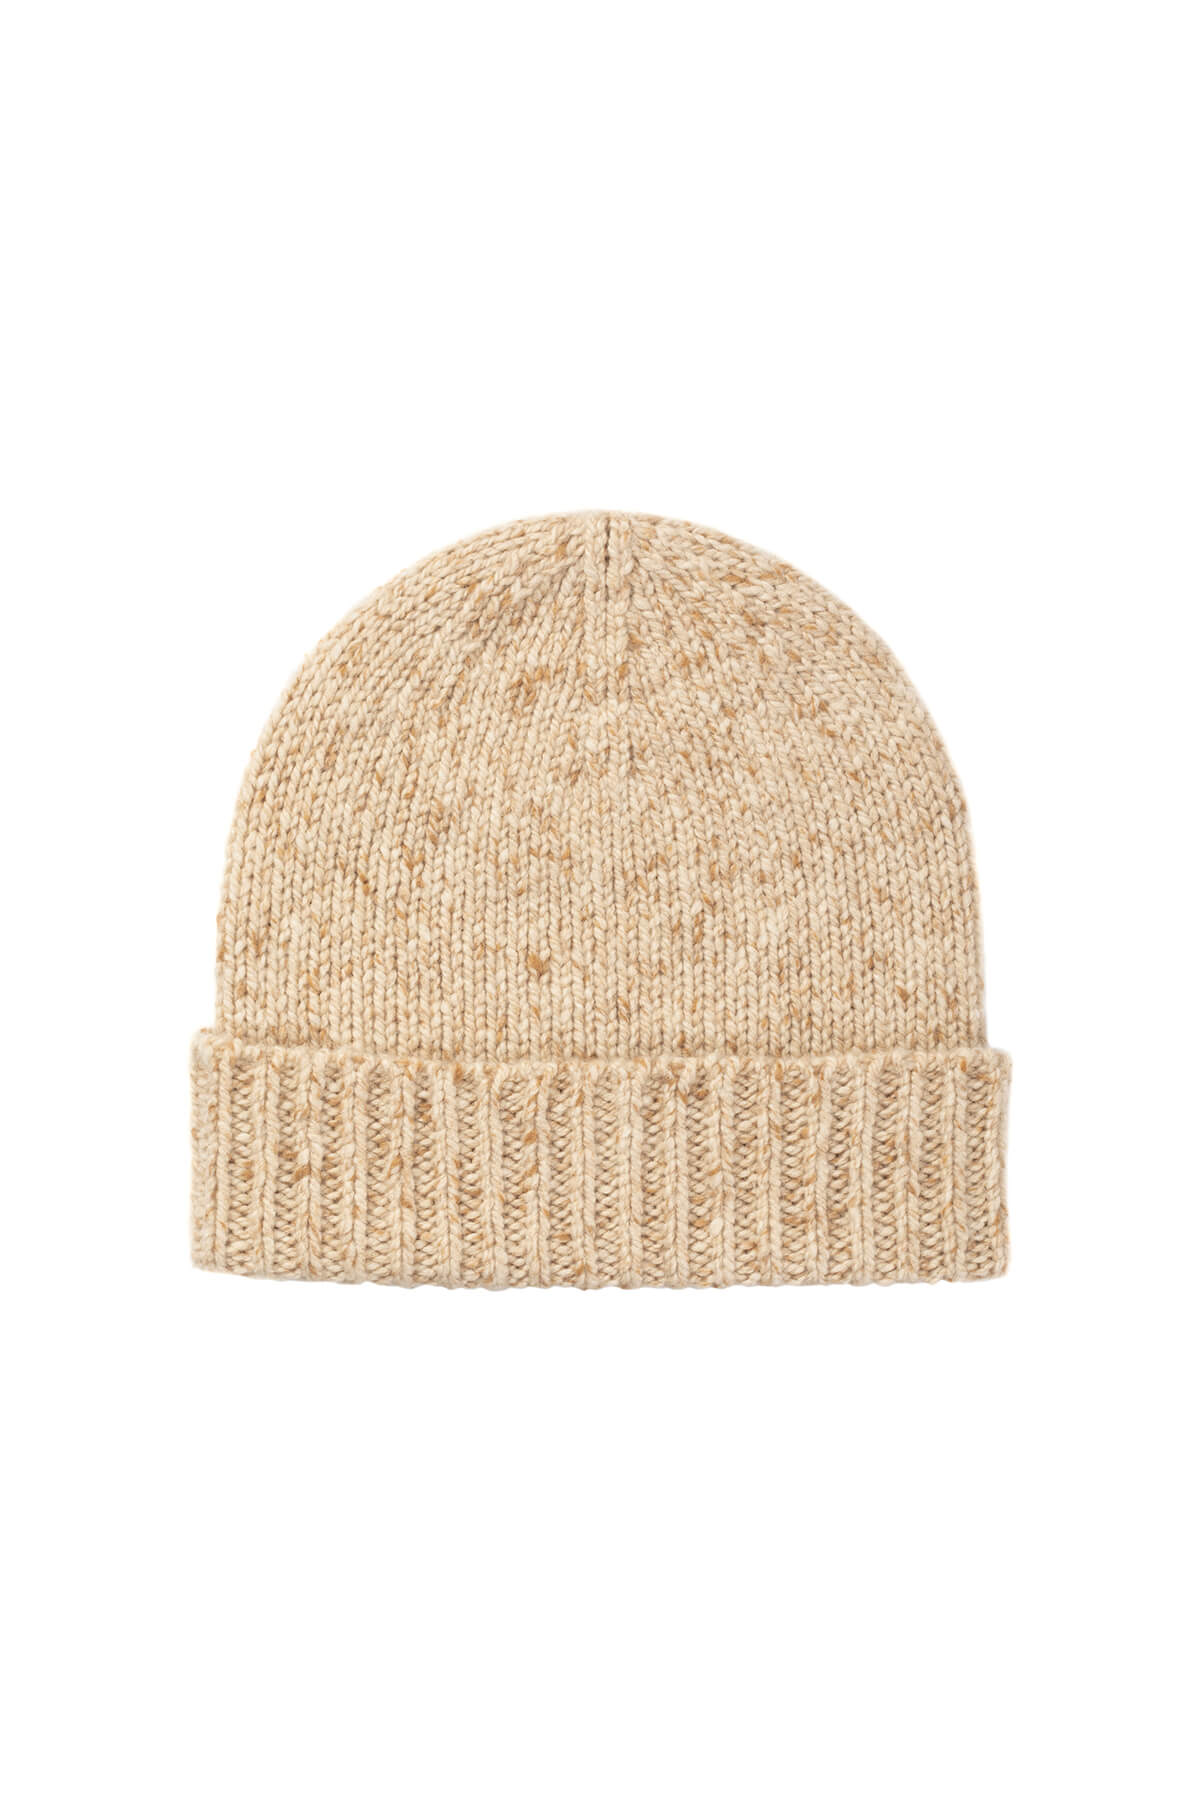 Johnstons of Elgin’s Light Camel Cashmere Donegal Beanie on a white background HAC03247HB0209